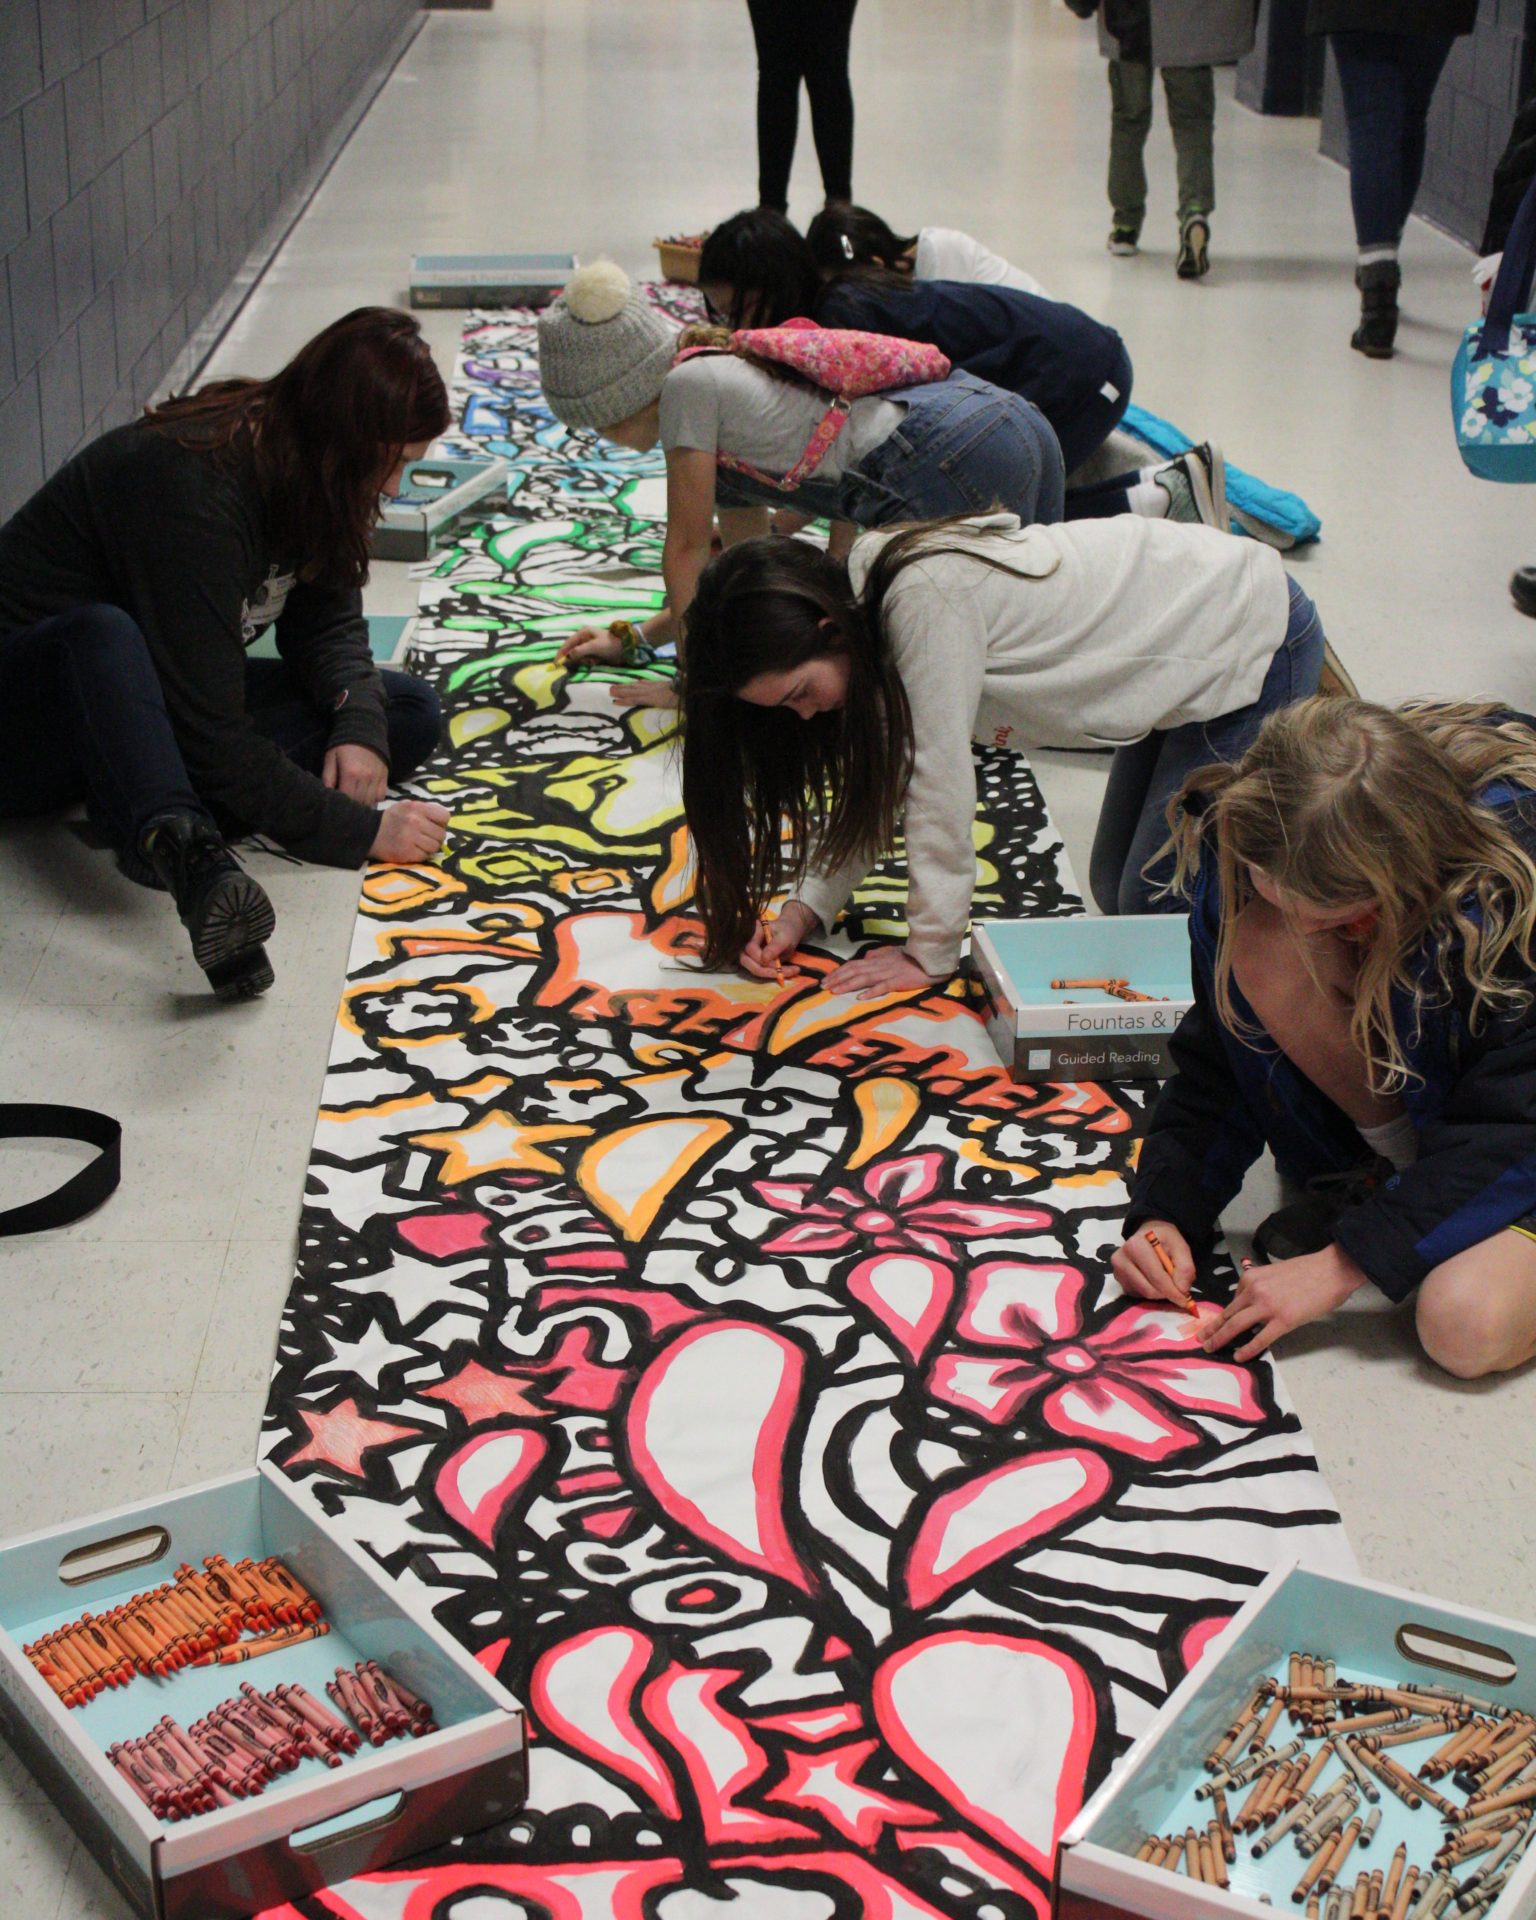 Students coloring on the floor banner.